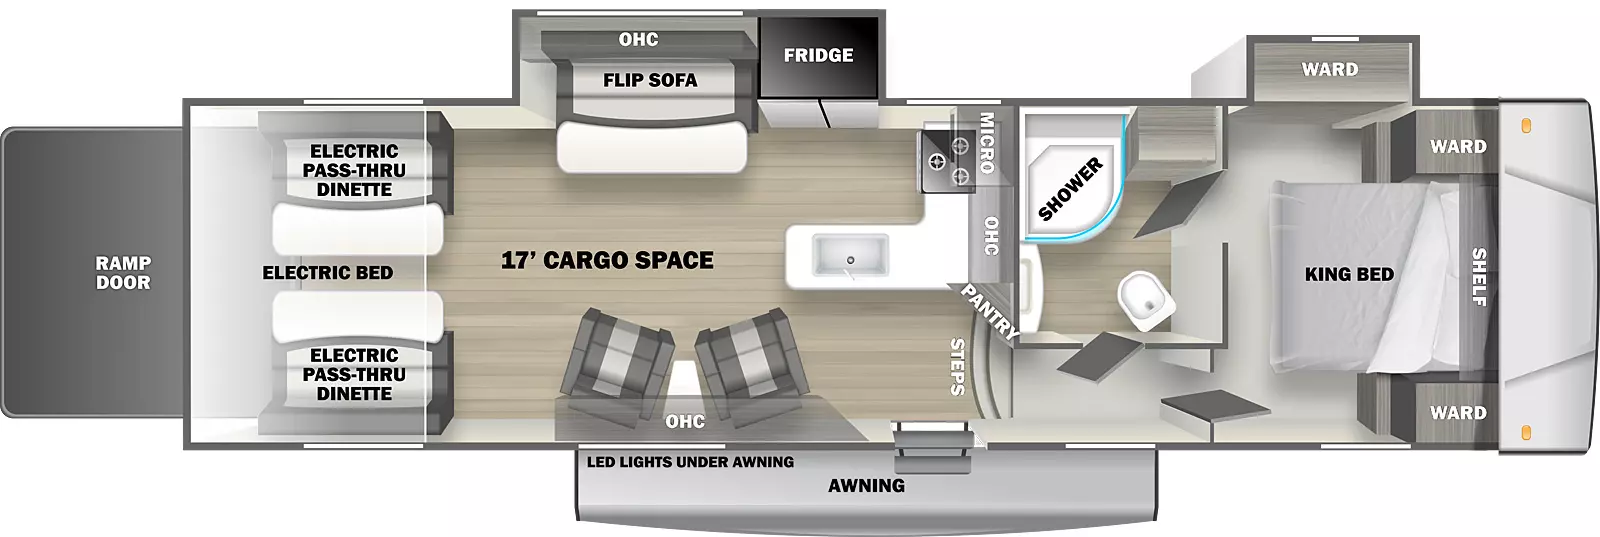 The Sandstorm 326GSLR is a toy hauler fifth wheel with one entry door, a rear ramp door, two slides on the off-door side, and 18' awning on the exterior. Inside, a walkaround king bed is located in the front of the unit, with wardrobe cabinets on either side and cabinets overhead.There is a slideout on the off-door bedroom wall that contains a wardrobe vanity. The bedrdoom has two doors, one into the bathroom and one into a short hallway with steps that opens to the main living area. The bathroom contains a sink, medicine cabinet, linen cabinet, commode, and glass radius shower. The kitchen countertop with sink, cooktop, and oven are located on the outside bathroom wall, with cabinets and a microwave mounted overhead. There is a pantry on the door side of the countertop. Next to the kitchen area on the off-door wall is a slideout containing a double door refrigerator and flip sofa with half dinette table and overhead cabinets. Additional overhead cabinets are mounted on the door side. A pair of upholstered chairs with small table between them are located underneath these cabinets.In the rear of the unit are two flip sofa benches, one on either side, with a split dinette table between them. These convert to a standard electric bed. This trailer provides 17' of interior cargo space.